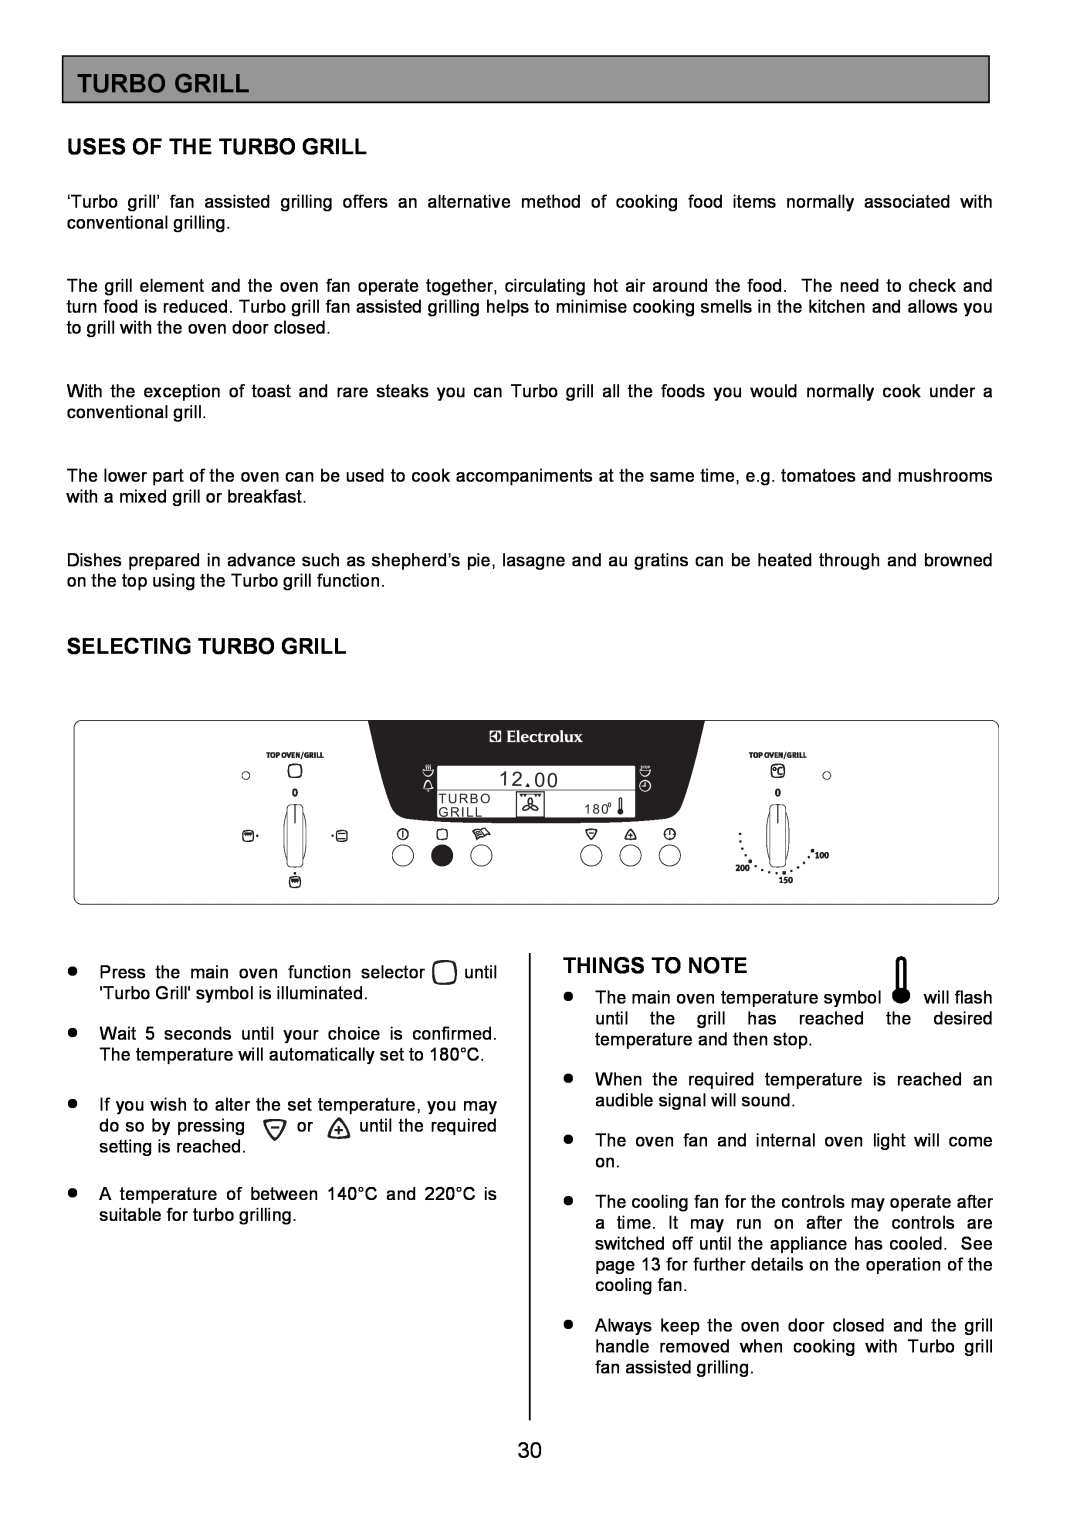 Electrolux EOD6390 manual Uses Of The Turbo Grill, Selecting Turbo Grill, Things To Note 